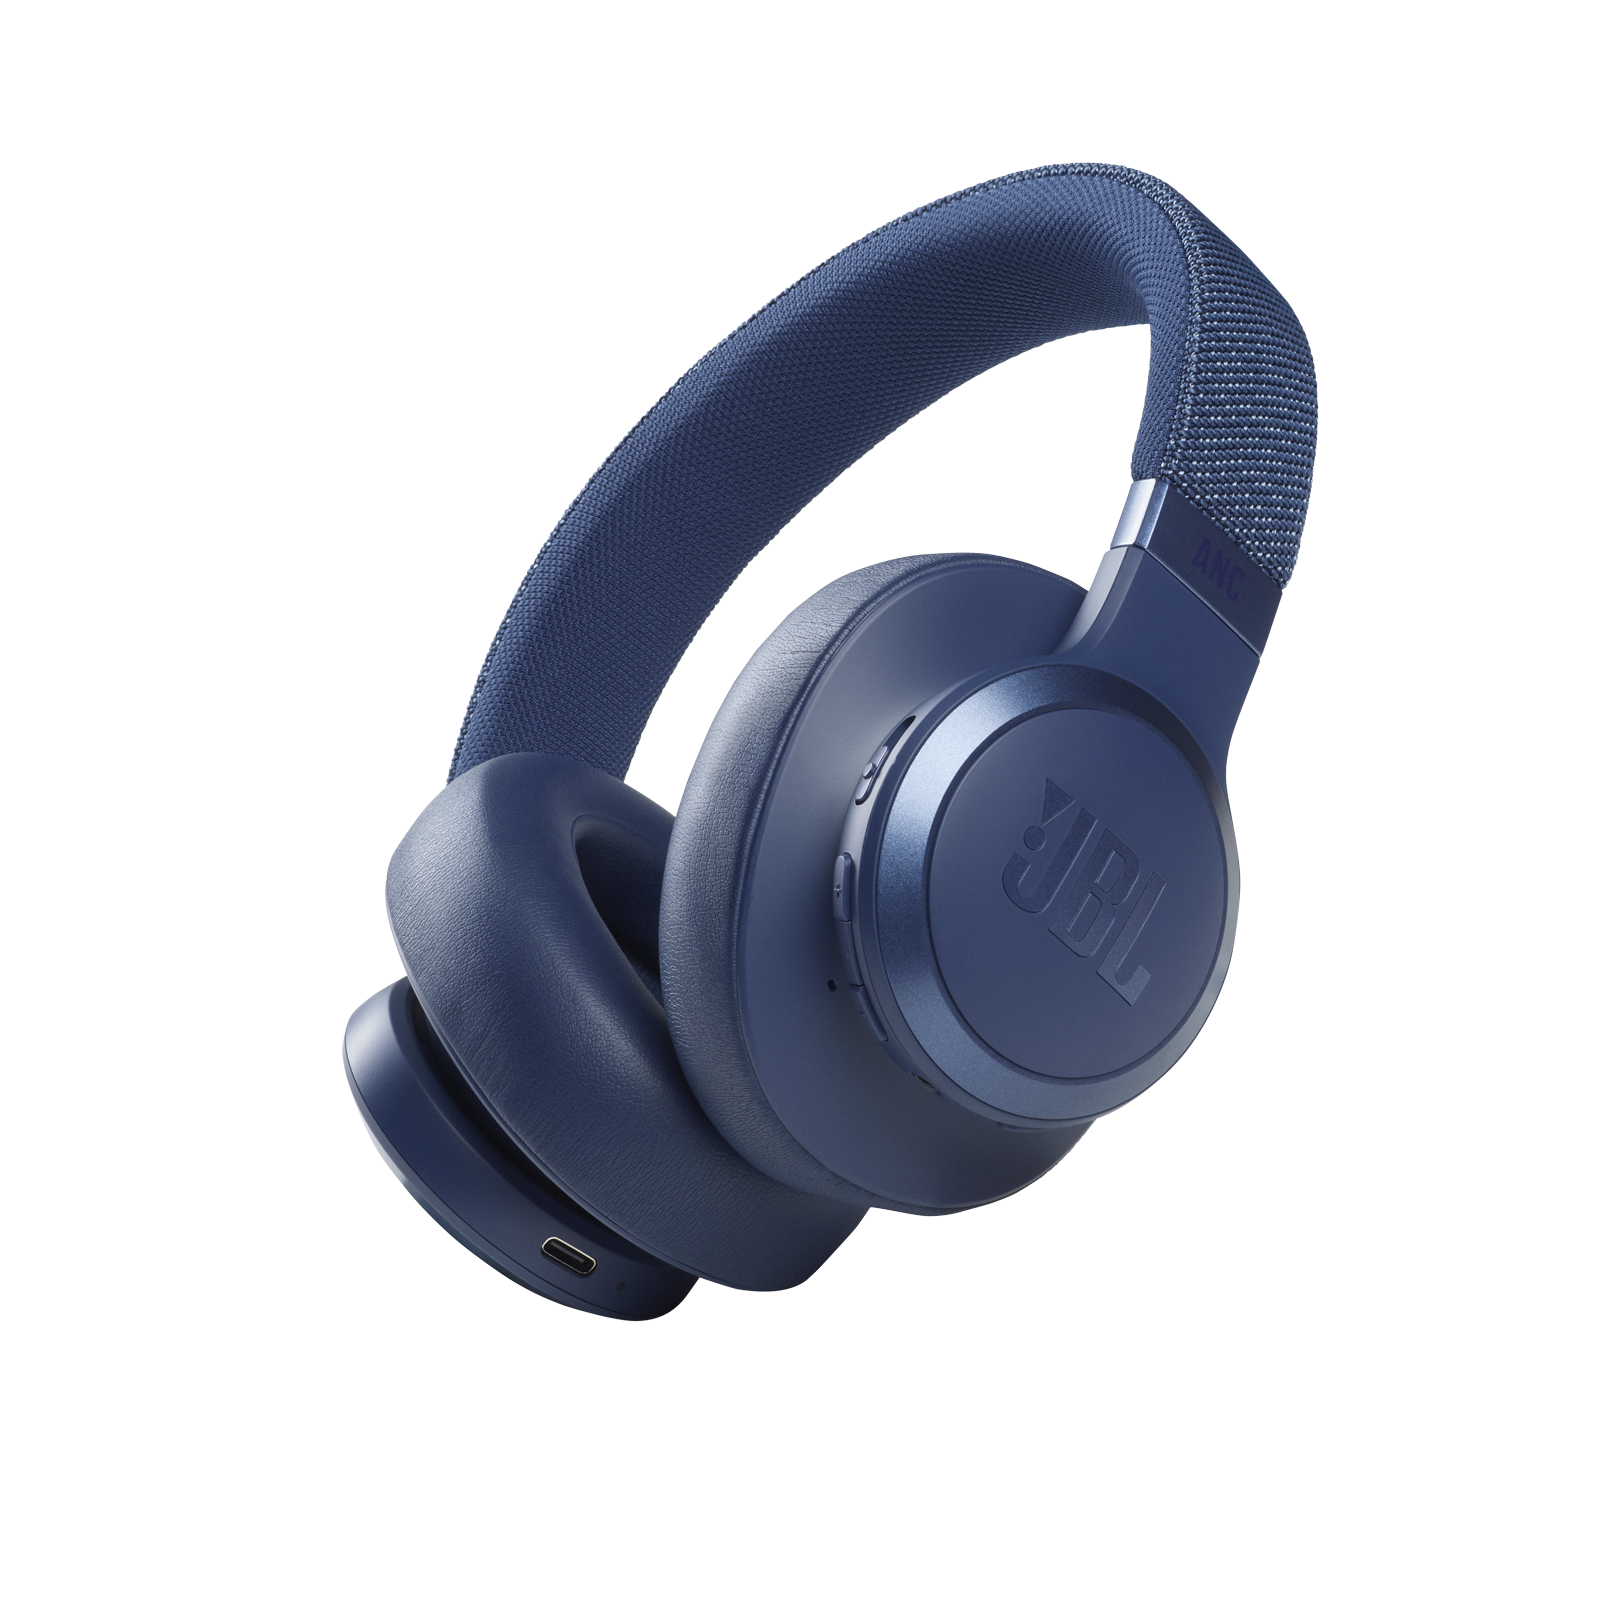 JBL Live Flex Wireless Bluetooth Noise Cancelation Headset in Shomolu -  Accessories for Mobile Phones & Tablets, Miki Ent Solutions